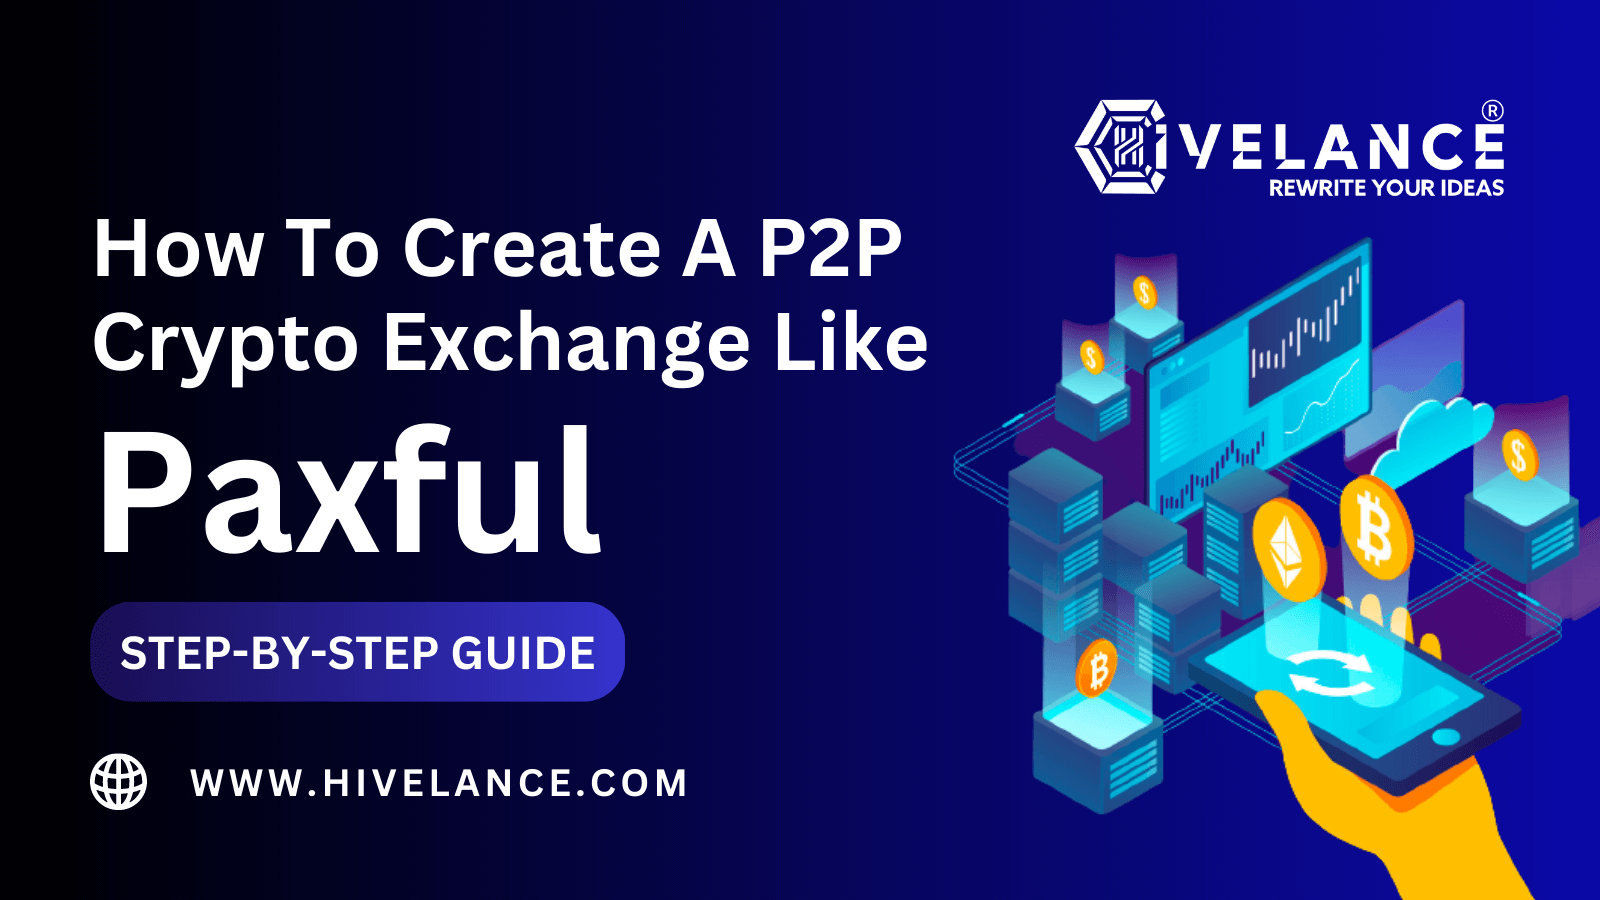 Building a P2P Crypto Exchange Like Paxful: A Step-by-Step Guide For Beginners